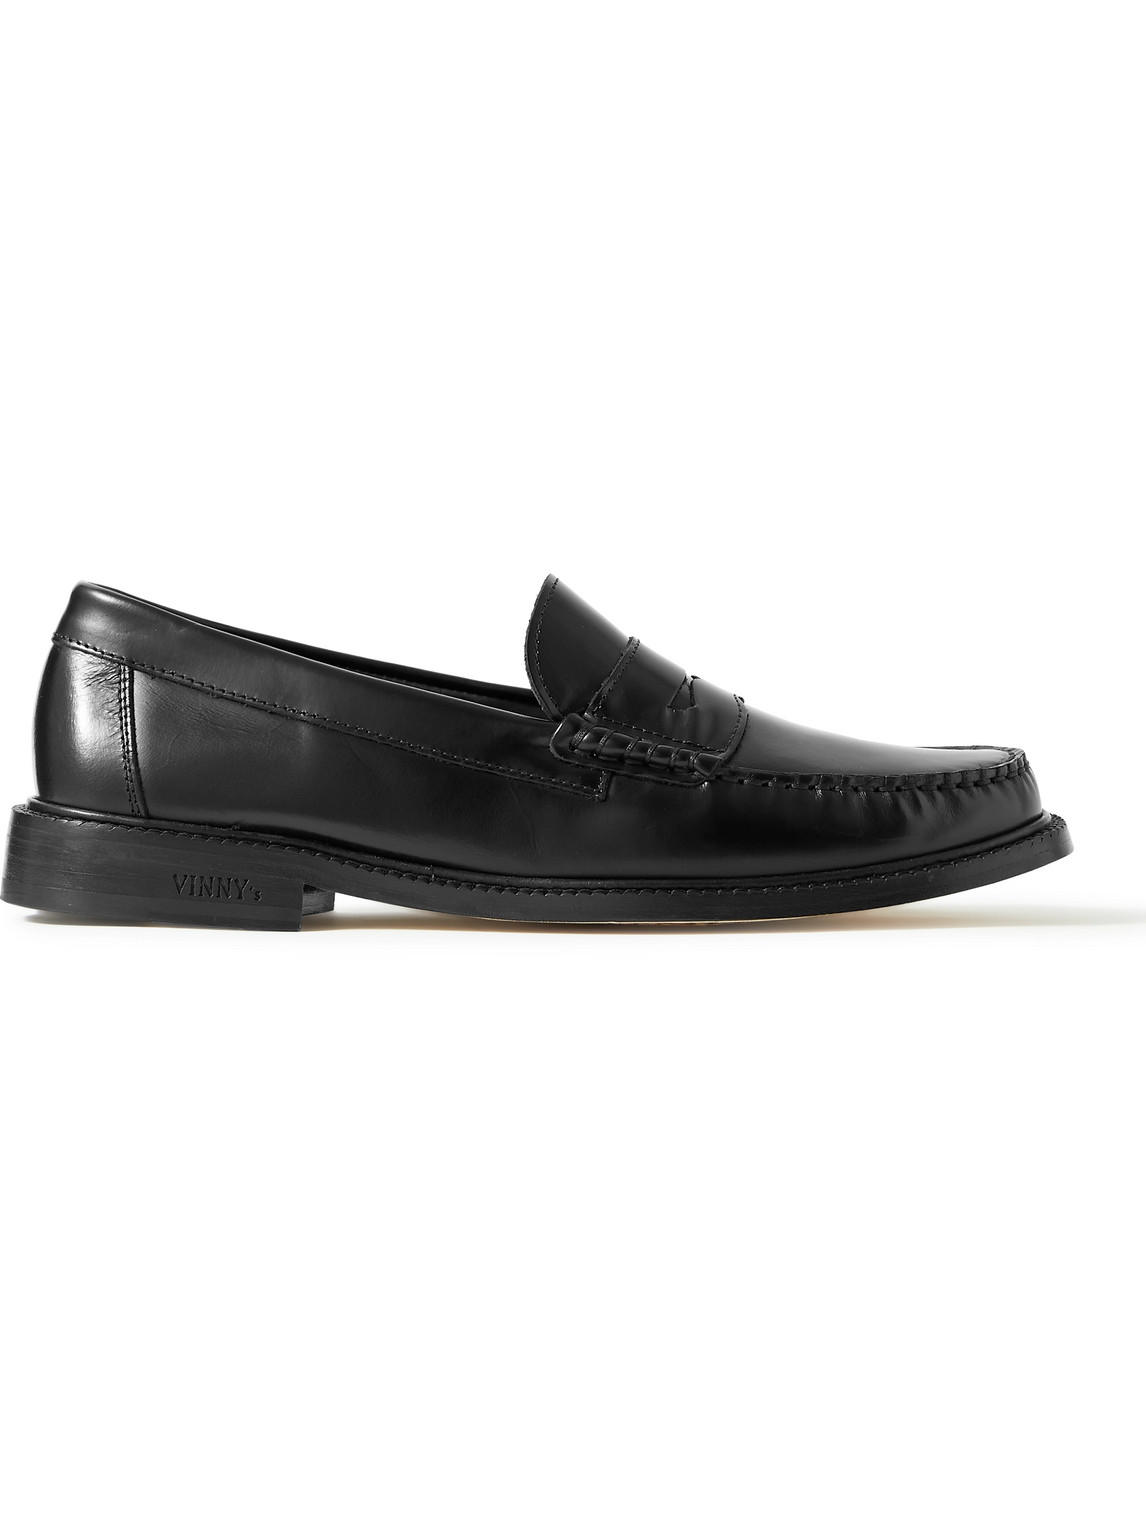 Yardee Leather Penny Loafers